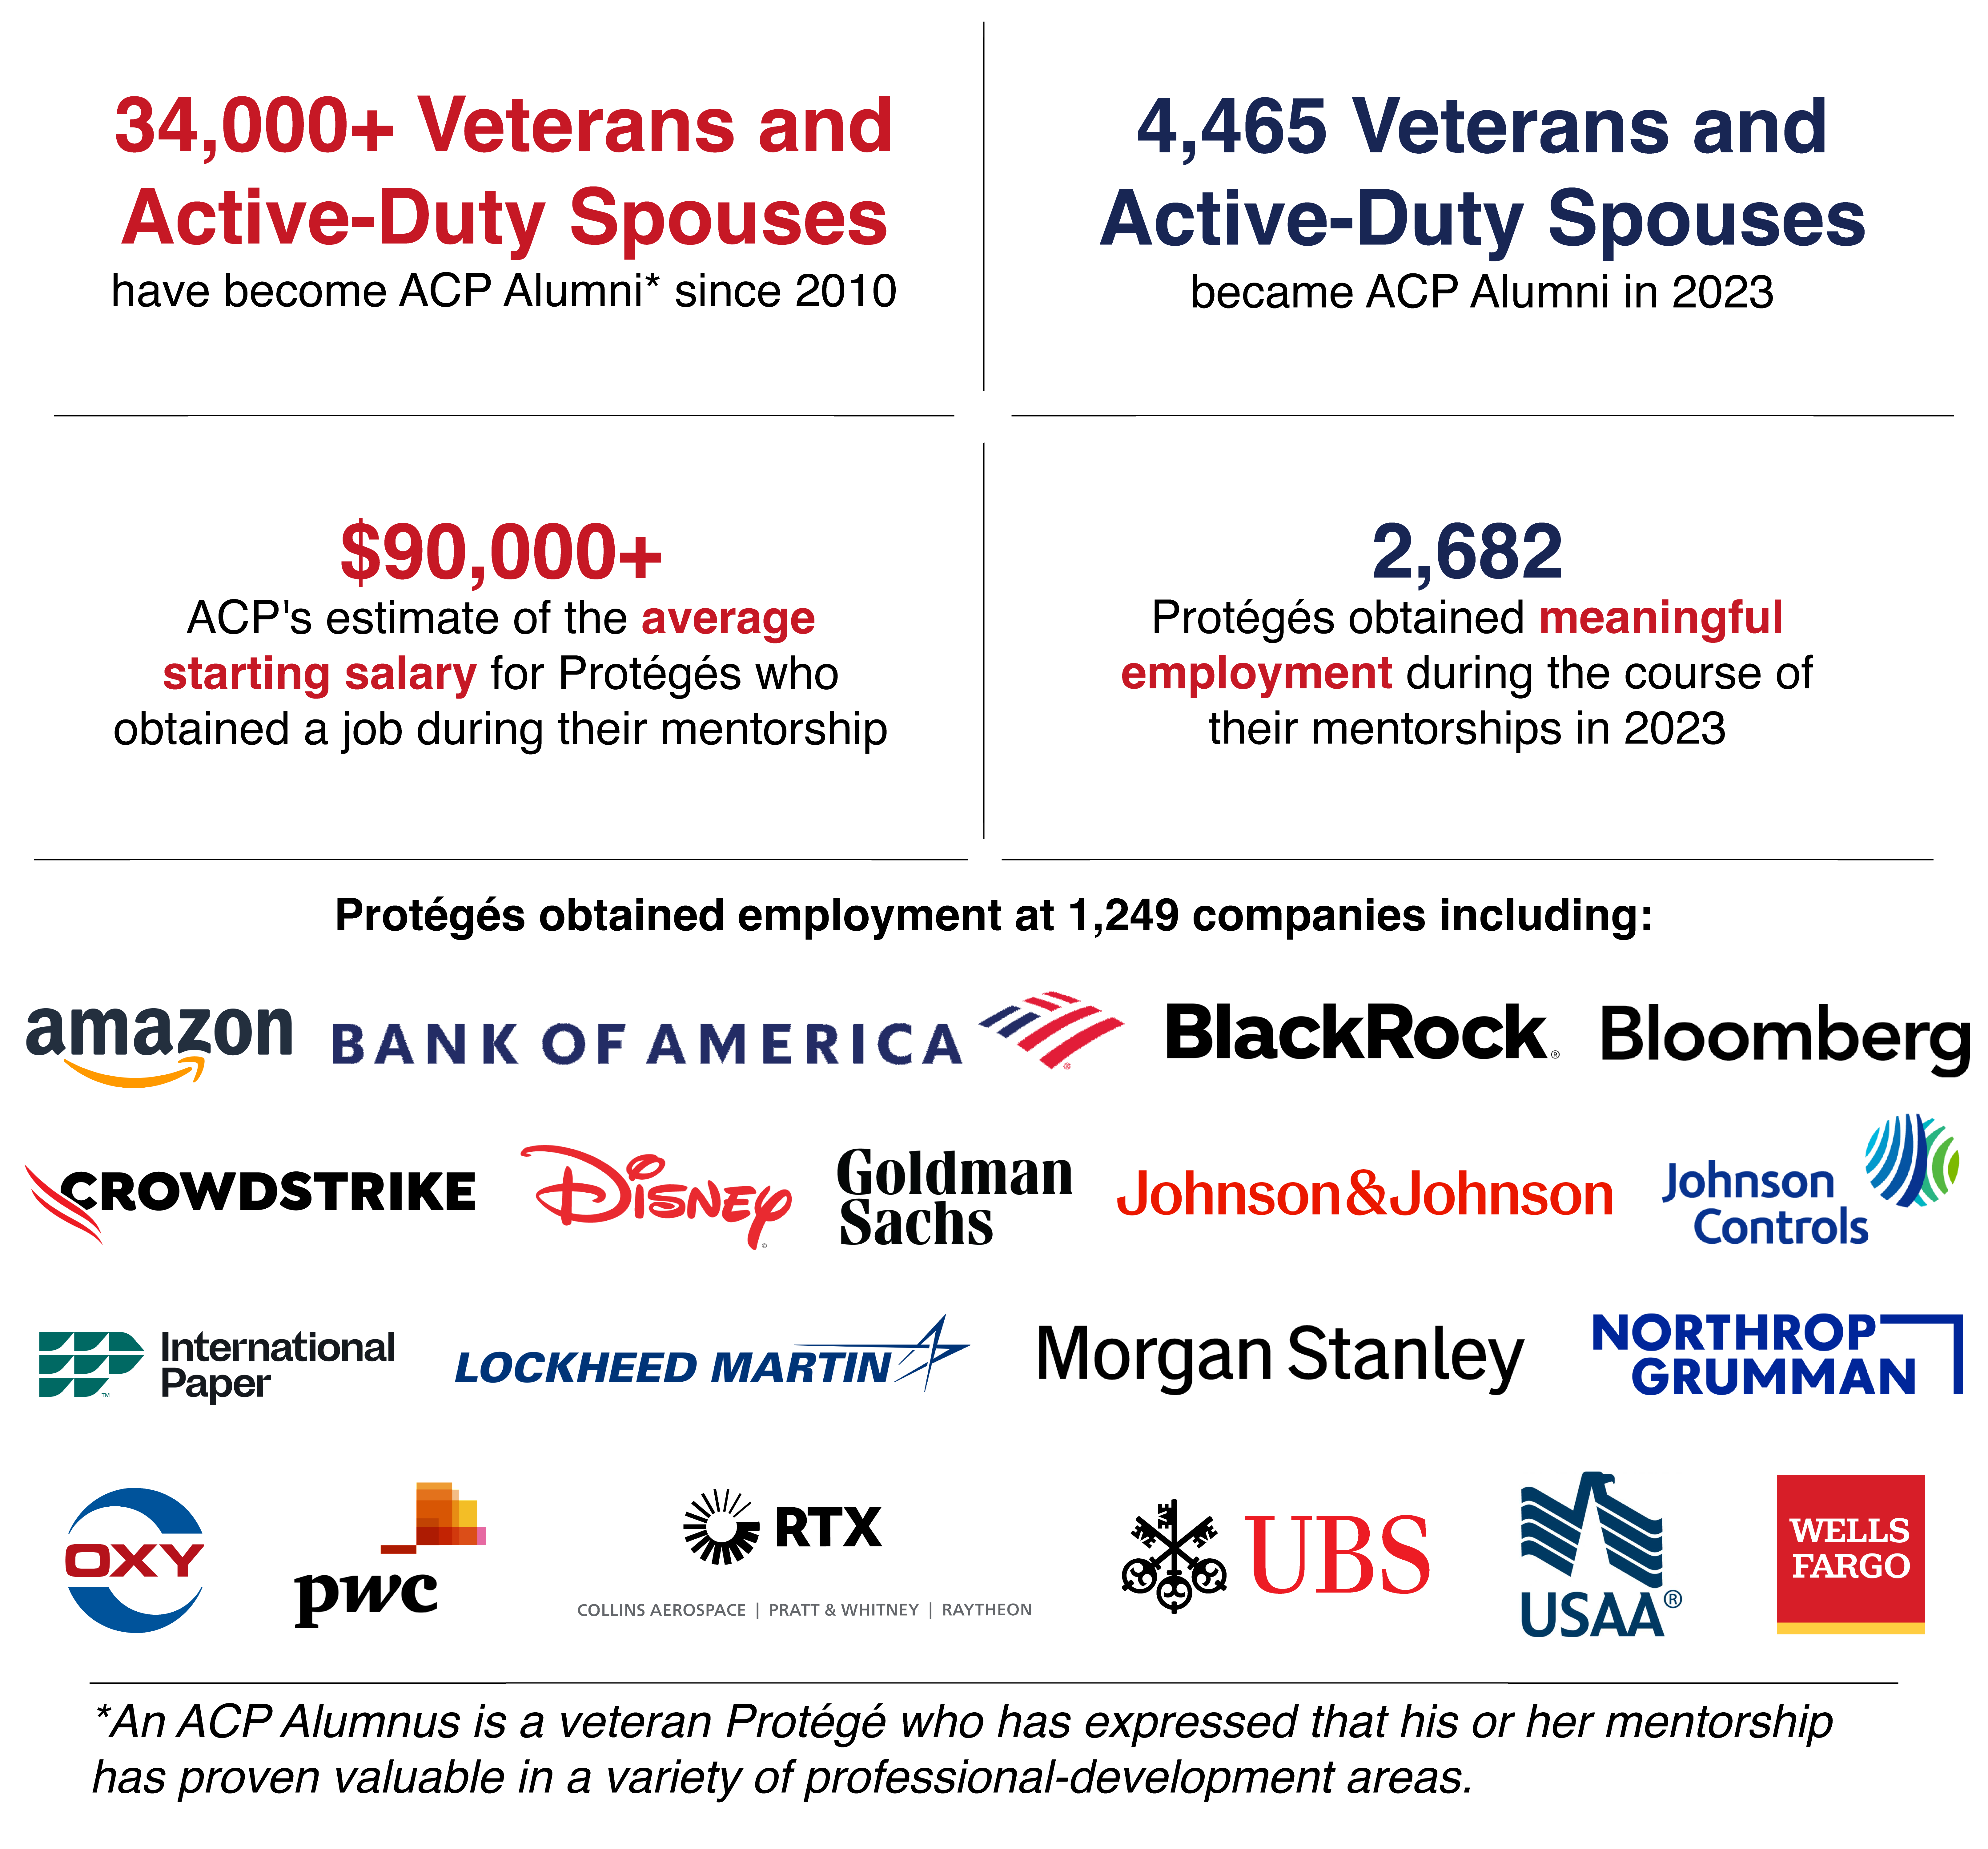 Veteran Mentoring Program Success statistics: 34,000+ Veterans and Active-Duty Spouses have become ACP Alumni since 2010. 4,400 Veterans and Active-Duty Spouses became Alumni in 2023. $90,000 is the estimate of the average starting salary of an ACP Protégé who got a job during mentorship. 2,682 Protégés obtained meaningful employment during the course of their mentorships in 2023. Protégés were hired at 1,249 companies. 